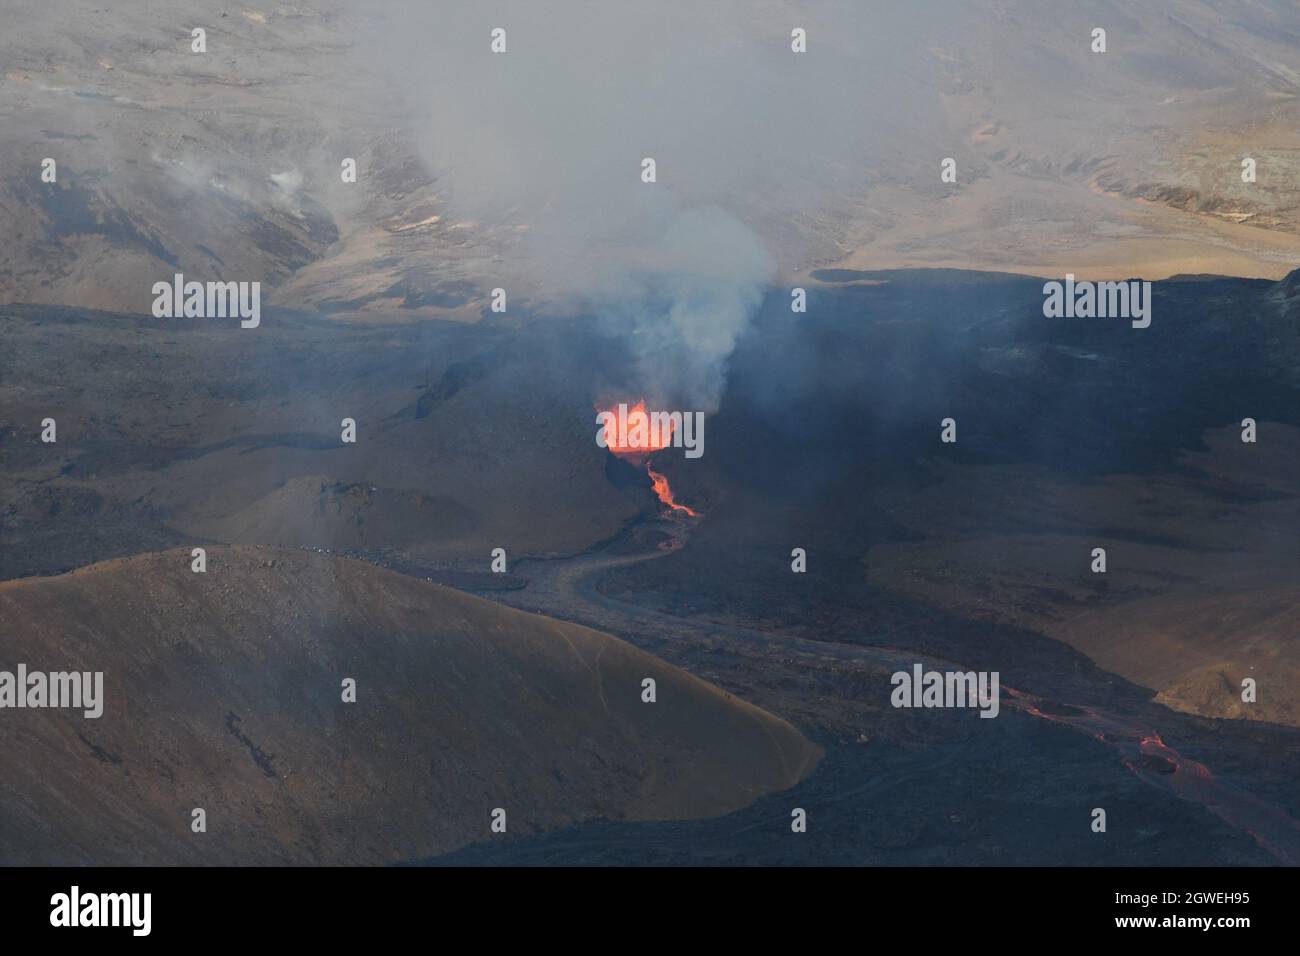 The lava field at Fagradalsfjall, Iceland. Active vent with molten lava erupting and volcanic gas rising. Black lava and blue sky. Aerial image. Stock Photo